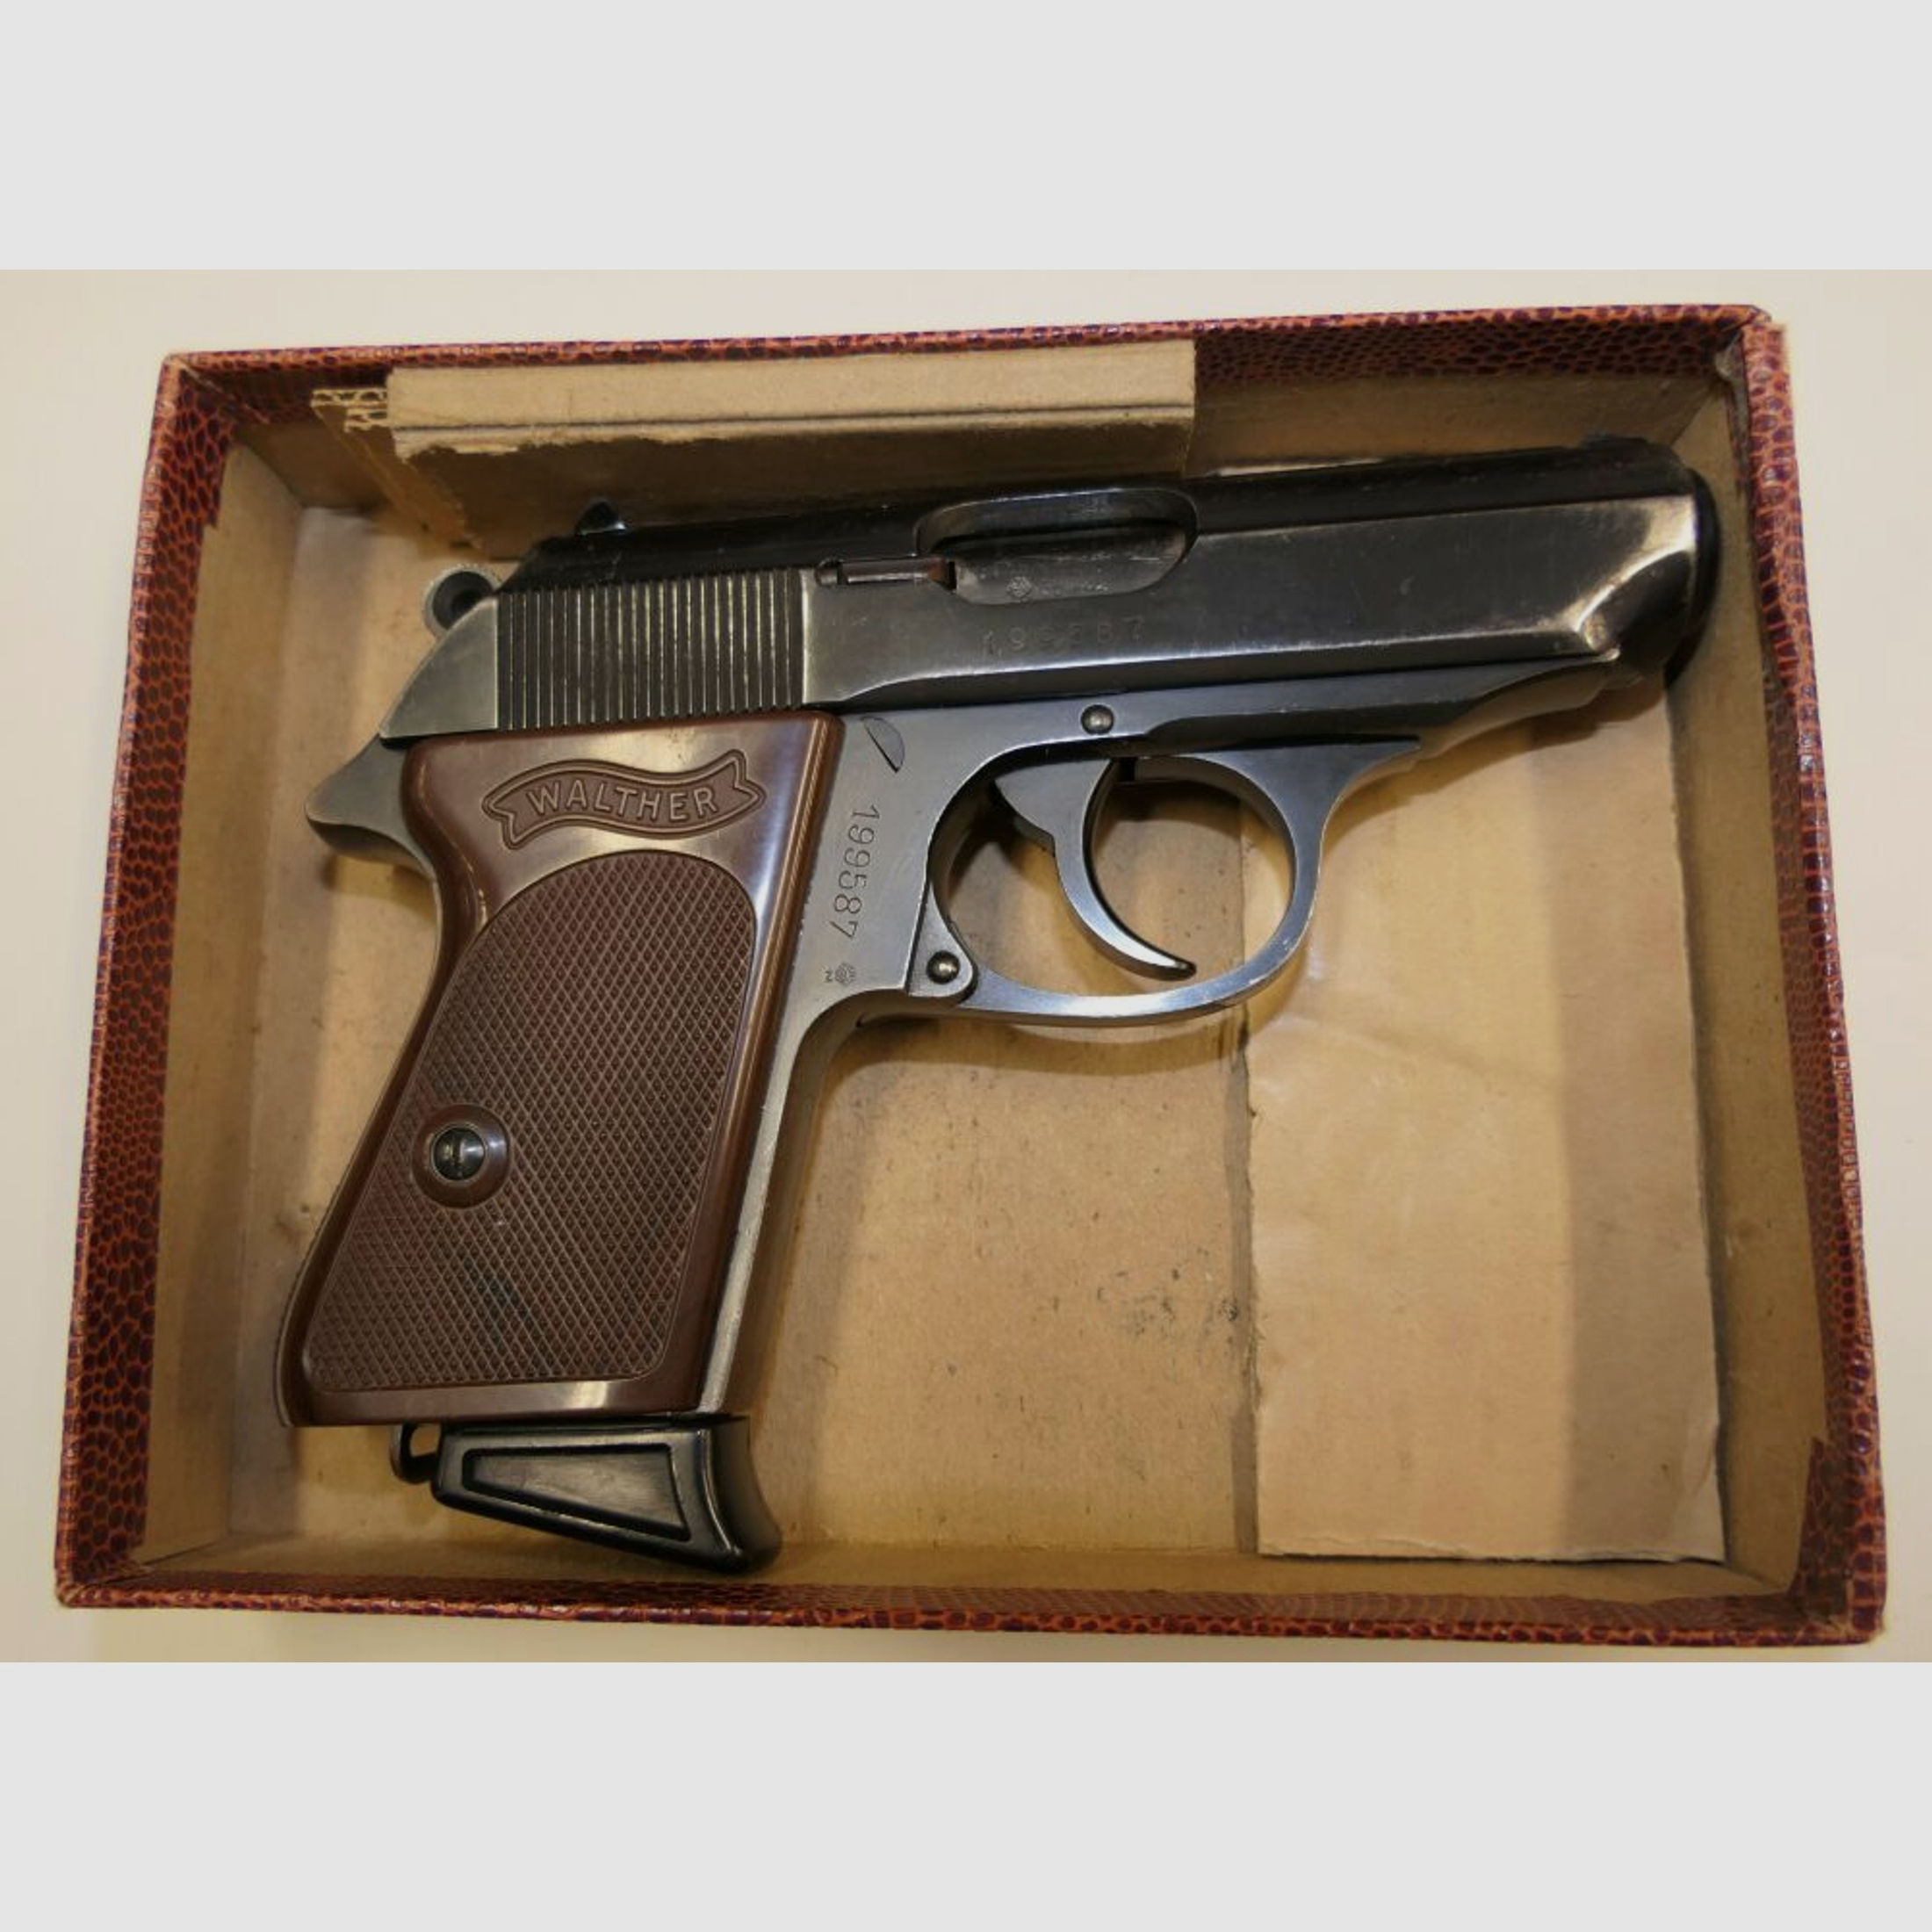 Walther	 Pistole Walther PPK, Kaliber 7,65mm Browning